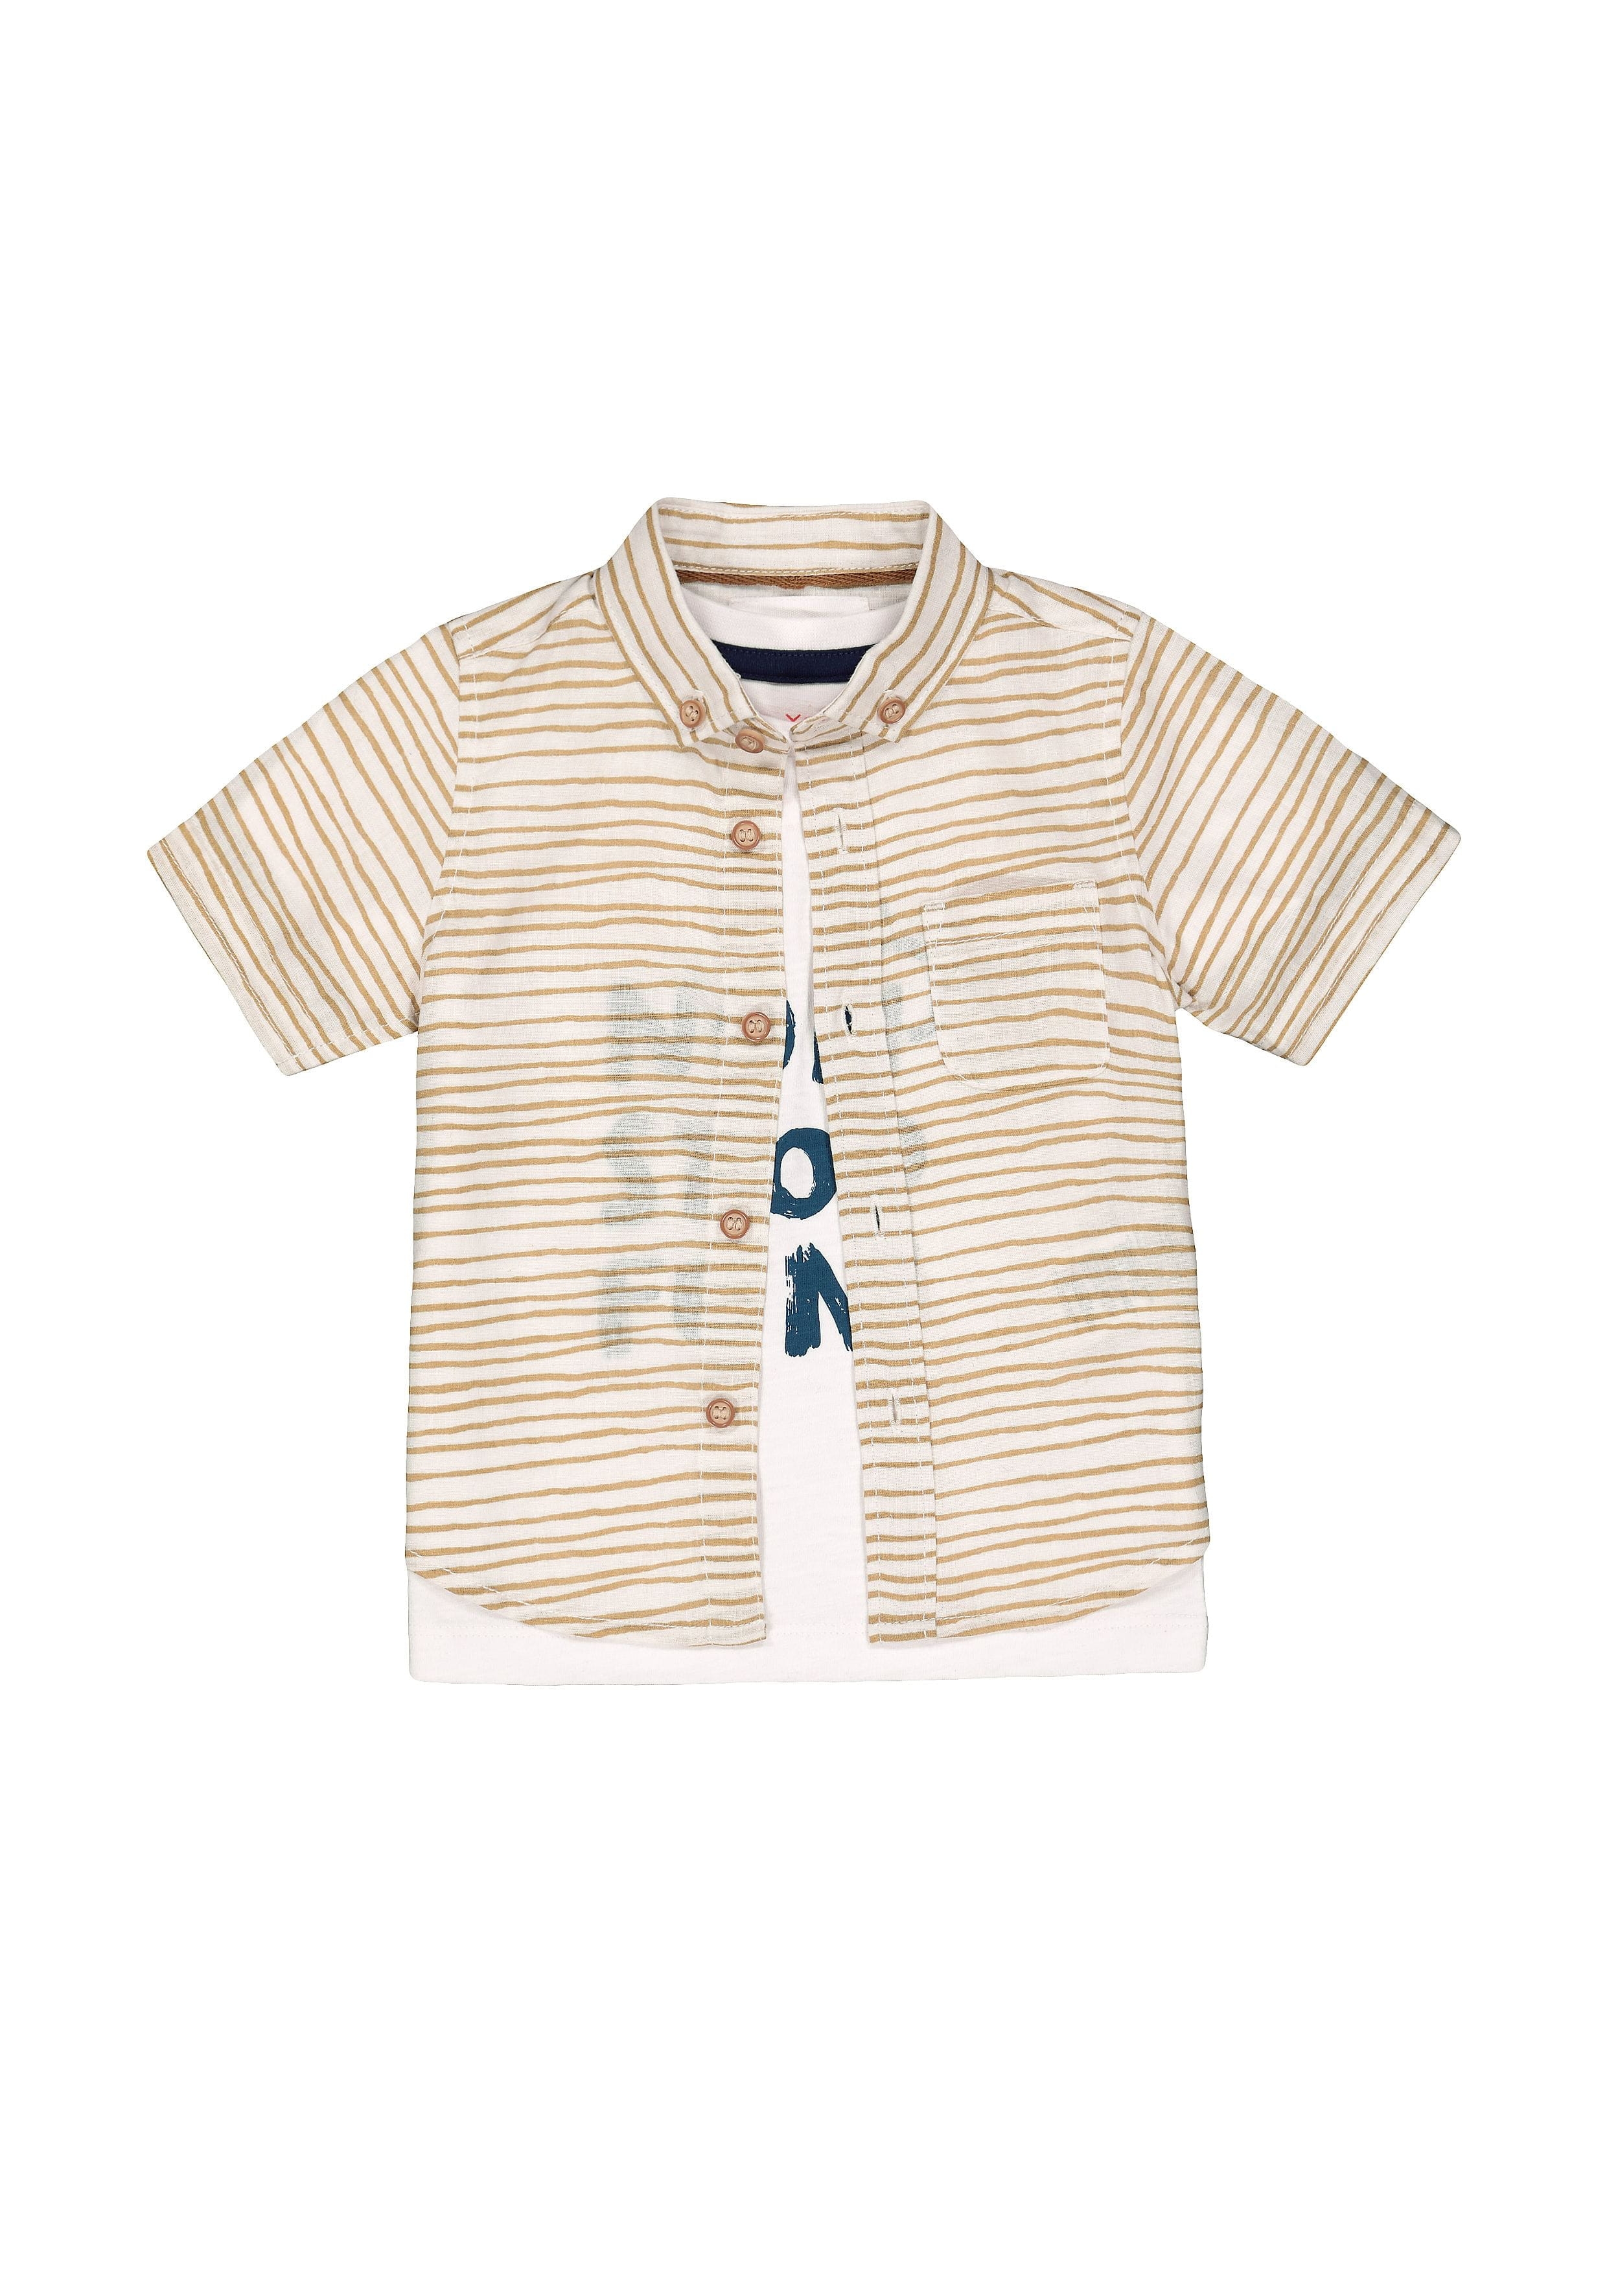 Mothercare | Boys Half Sleeves Shirt And T-Shirt Set Stripe Text Print - White Beige 0